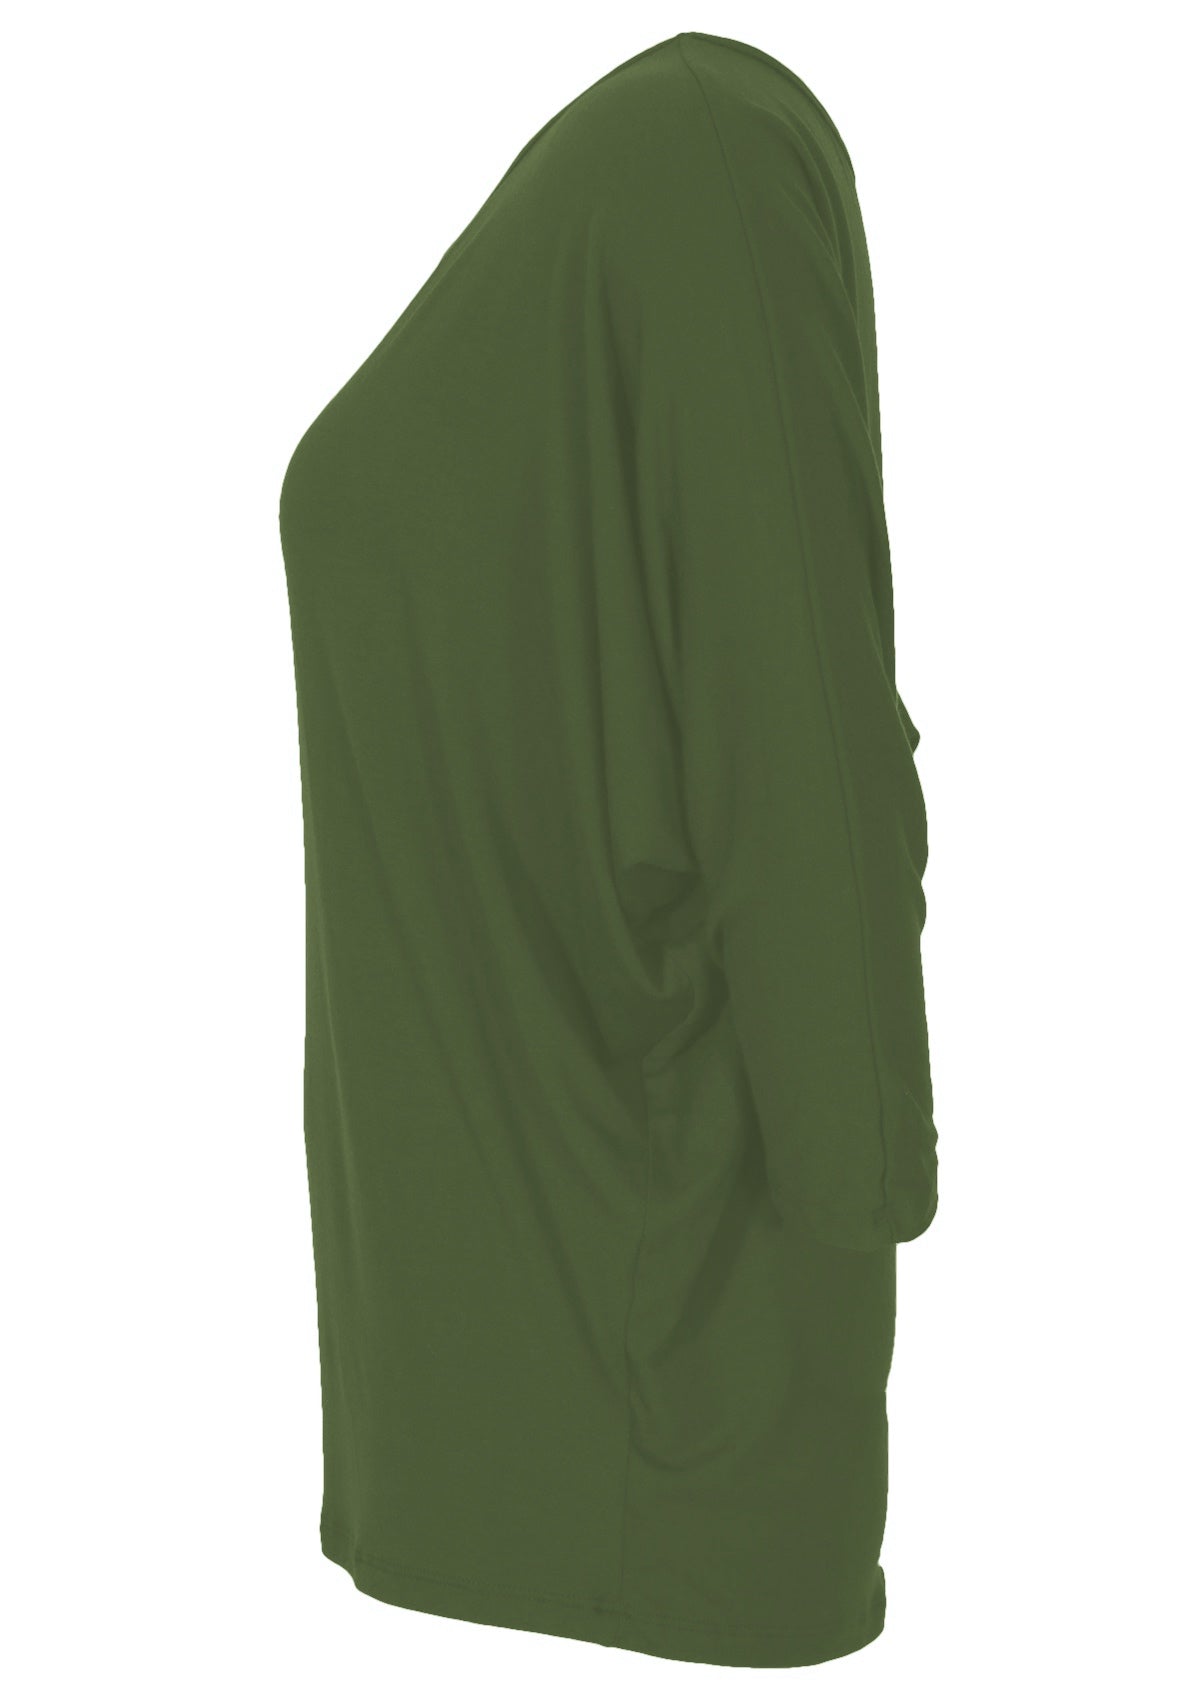 Side view of women's 3/4 sleeve rayon batwing round neckline olive green top.